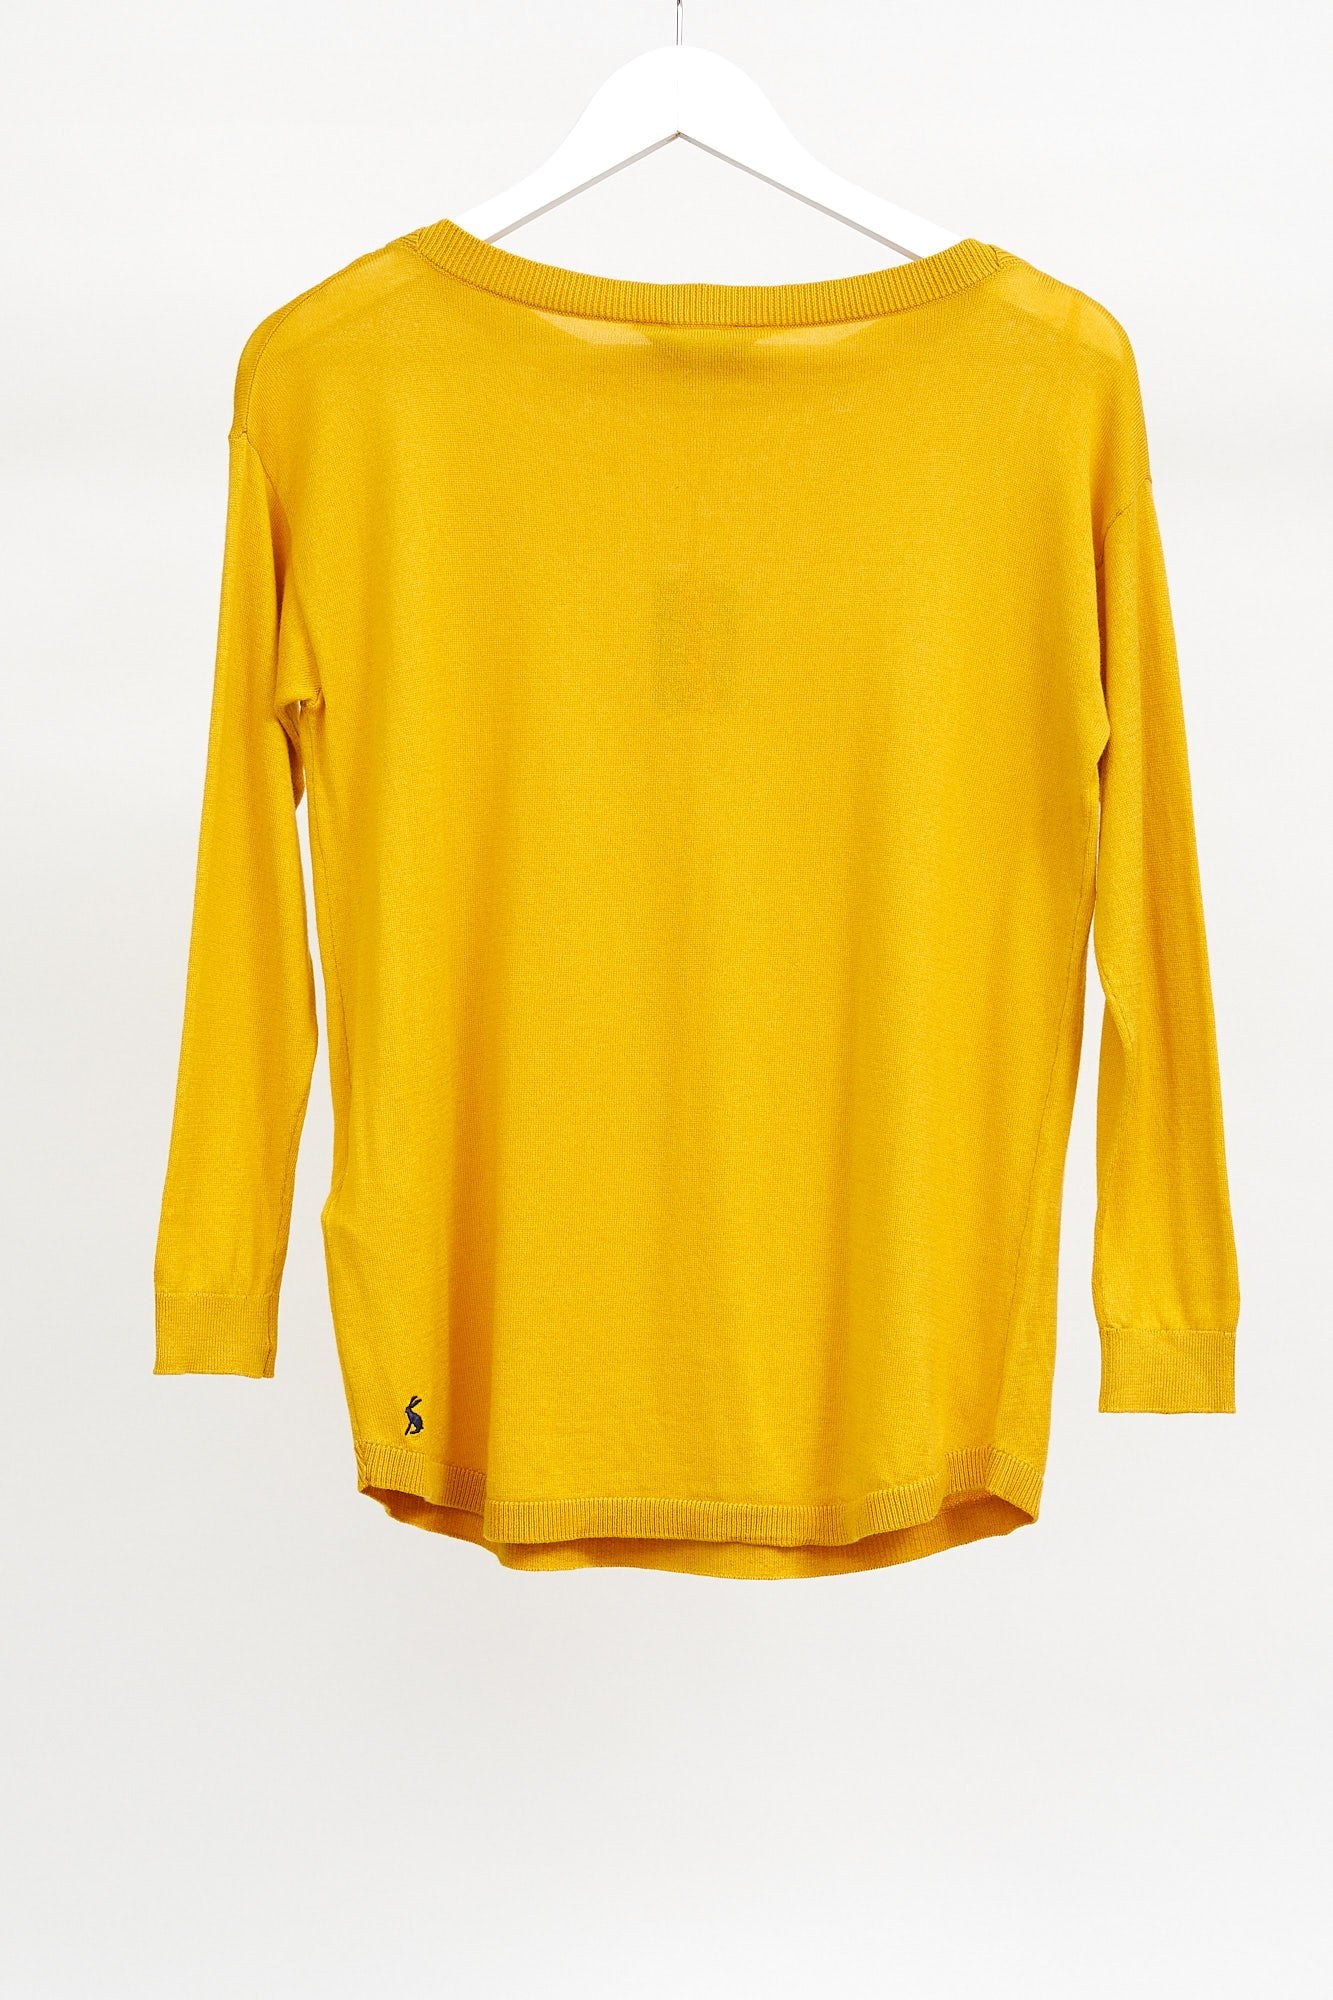 Womens Joules Yellow Sweater: Size Small